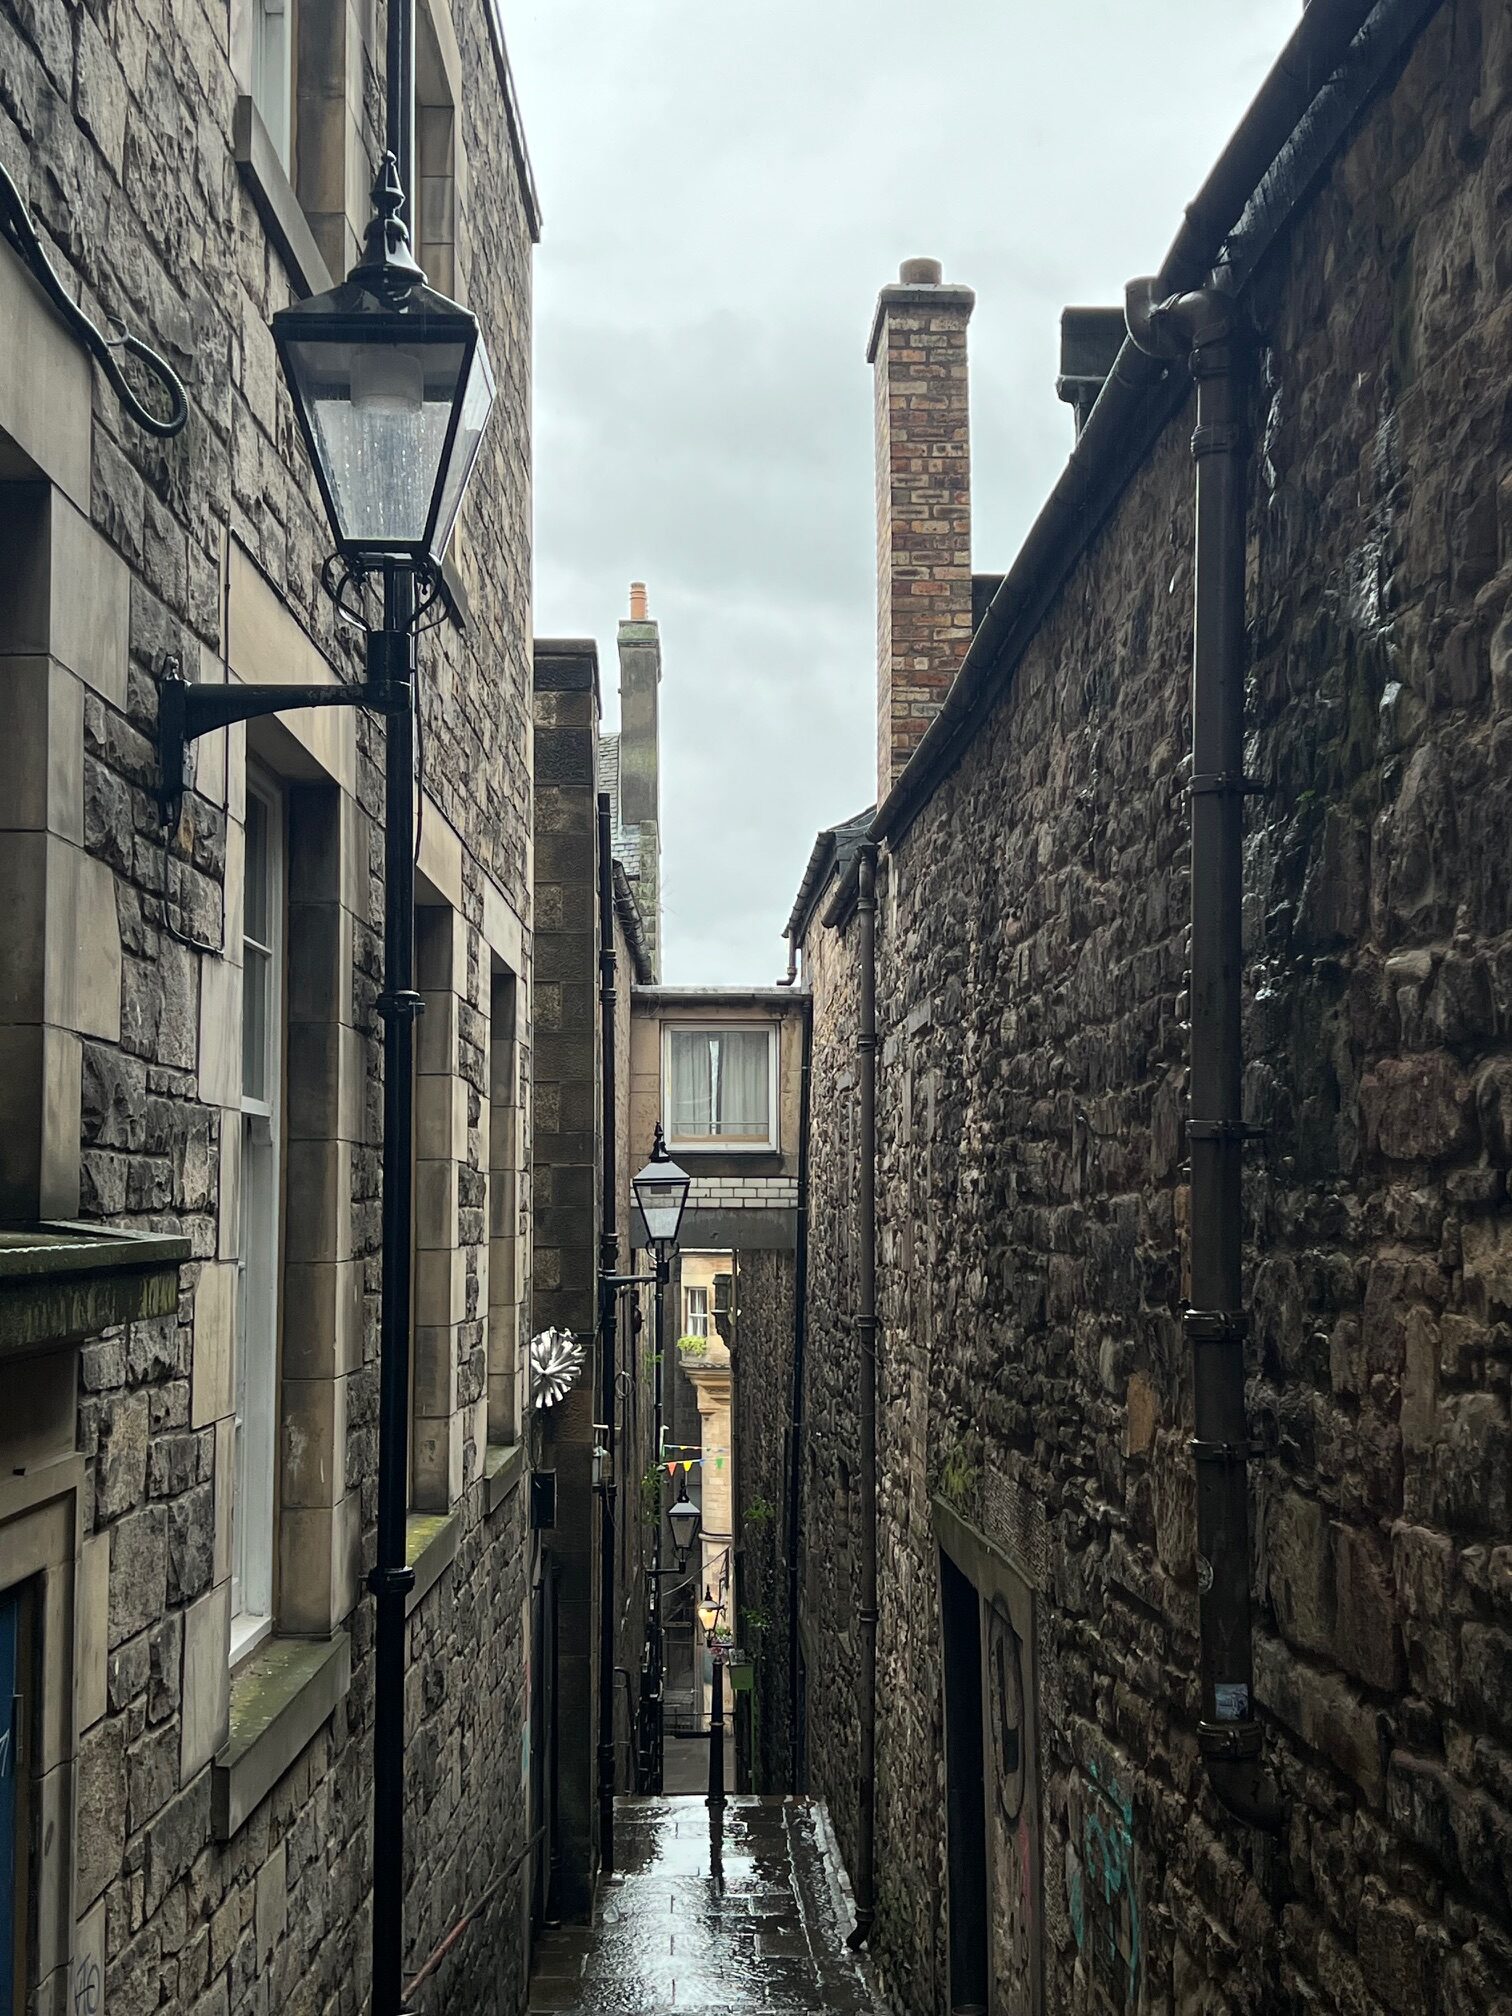 one of the tiny alleys you can find and explore in Edinburgh